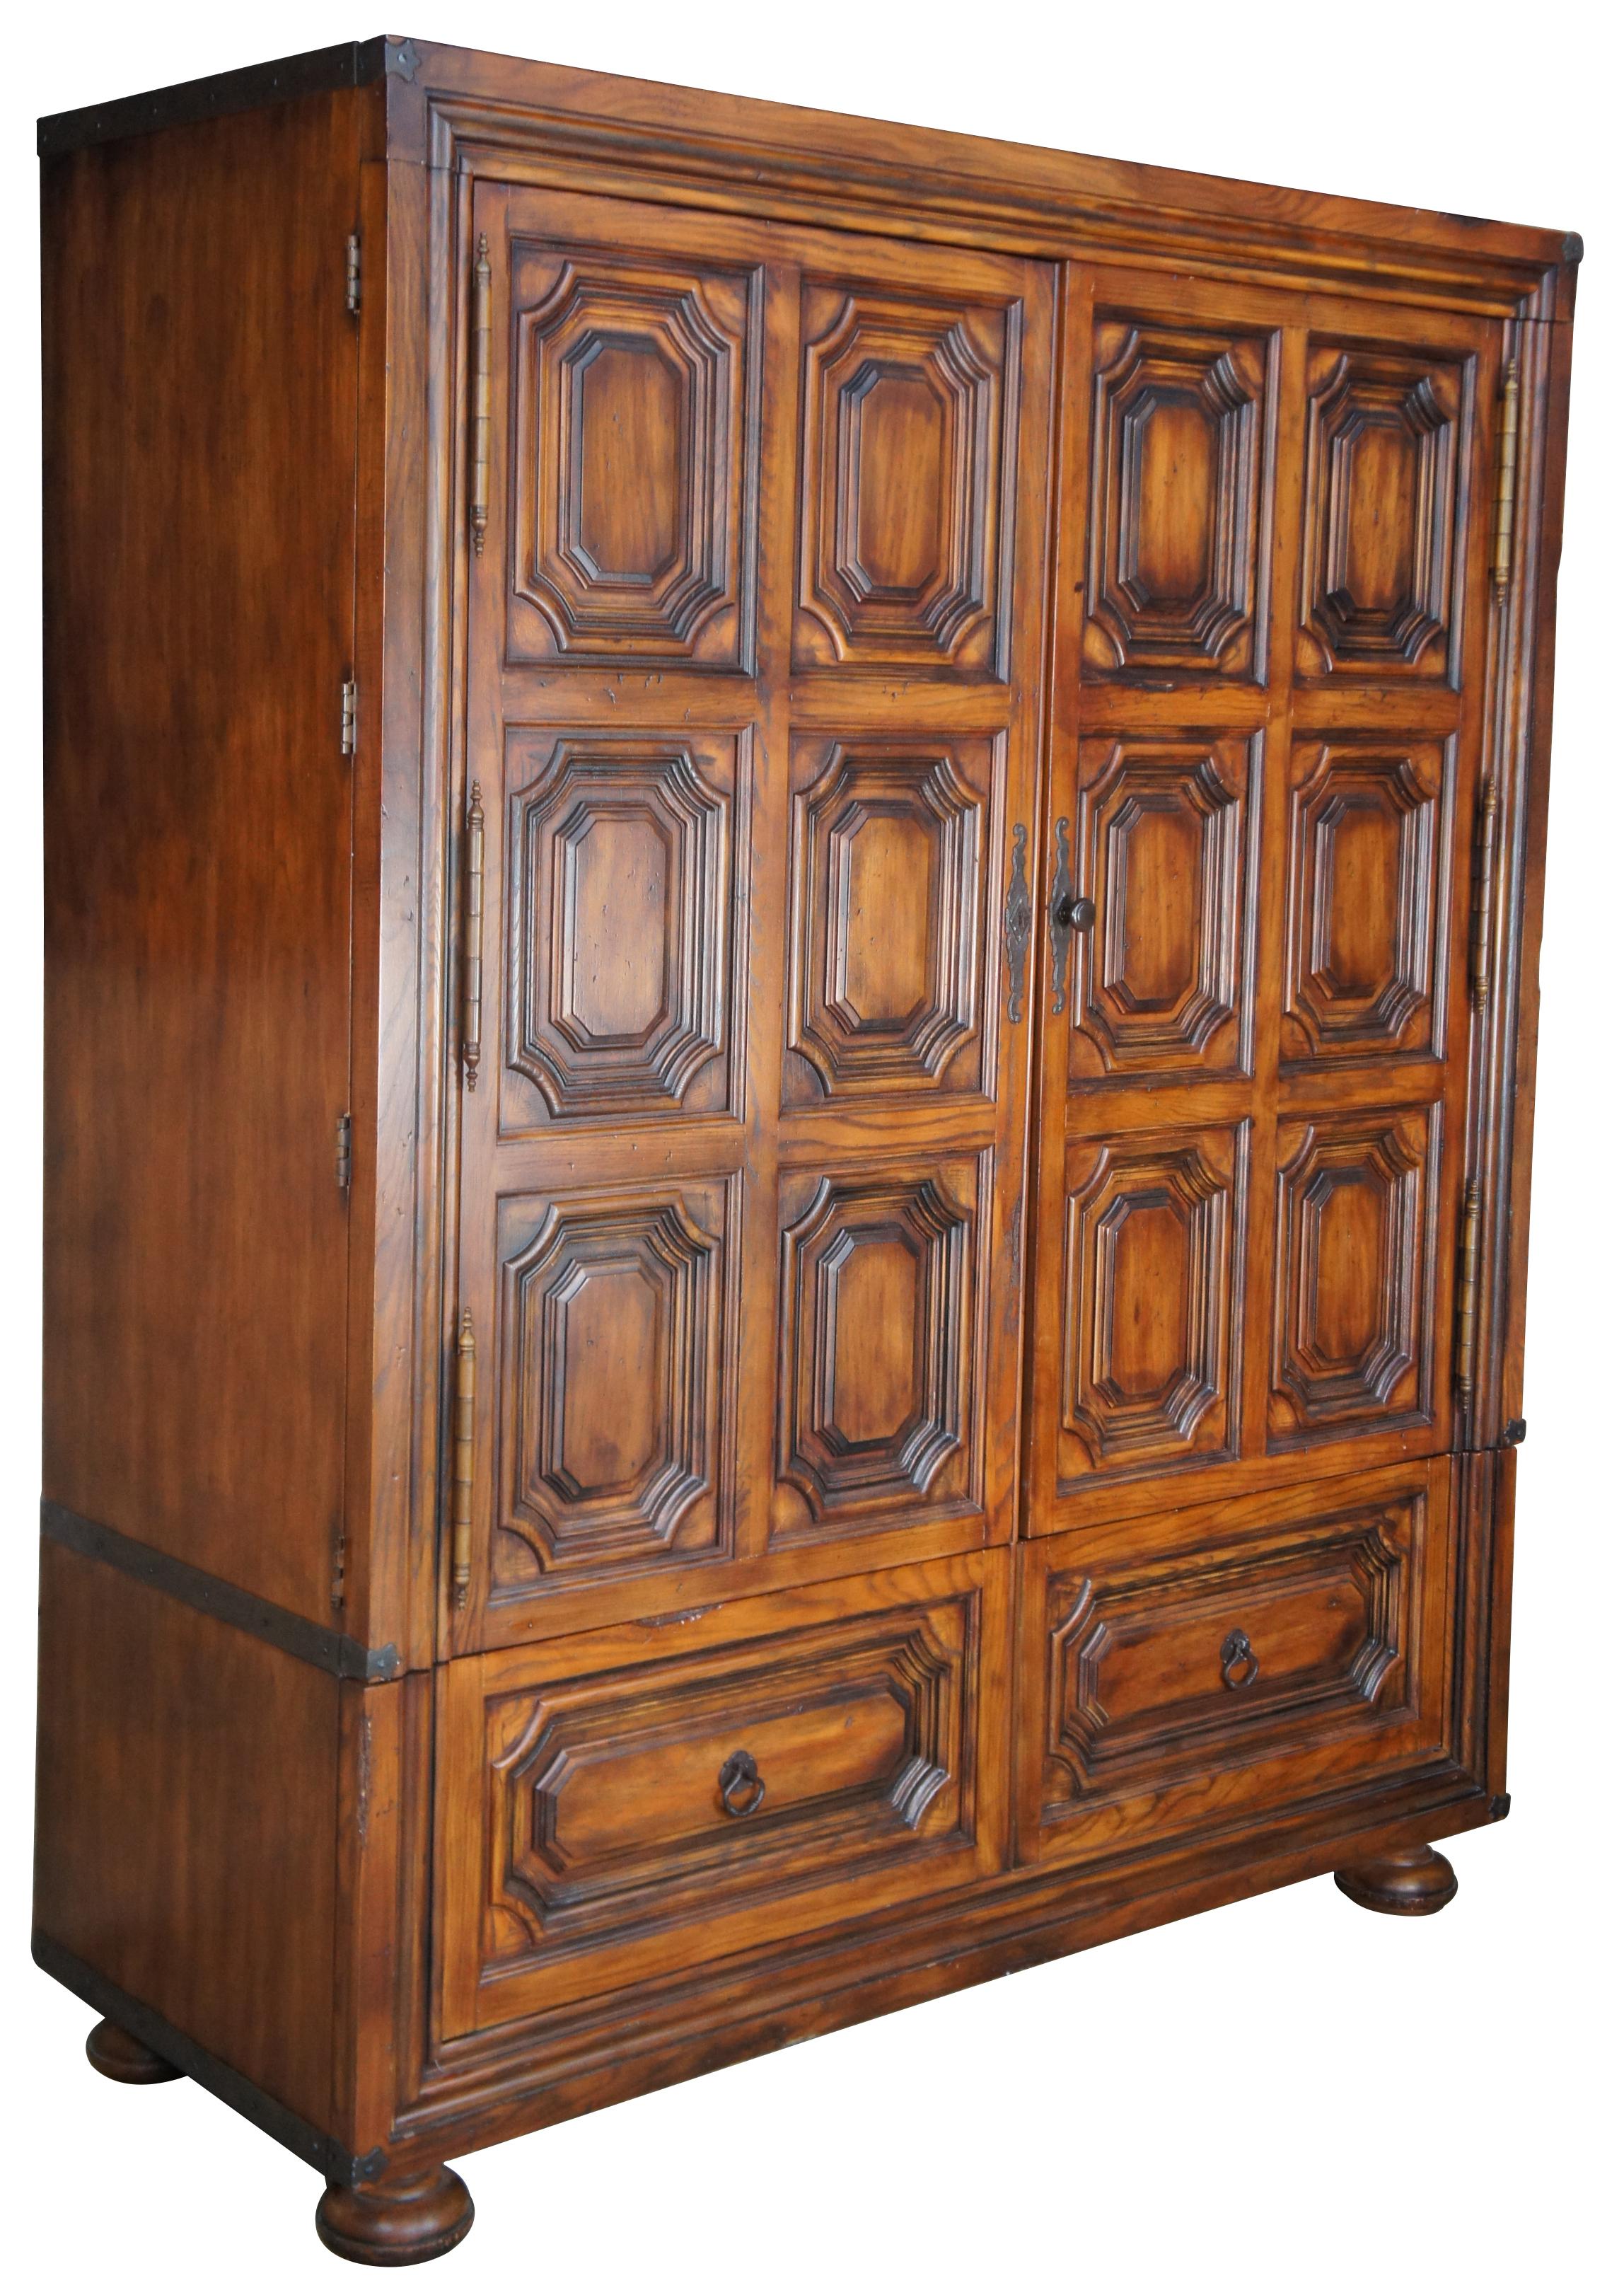 Henredon for Ralph Lauren 1301-05 Sheltering Sky armoire. Made from oak with a British Colonial / West Indies inspired paneled front and old world hardware. Features bi hinge doors, two large drawers and bun feet. Great for use as a linen press, tv